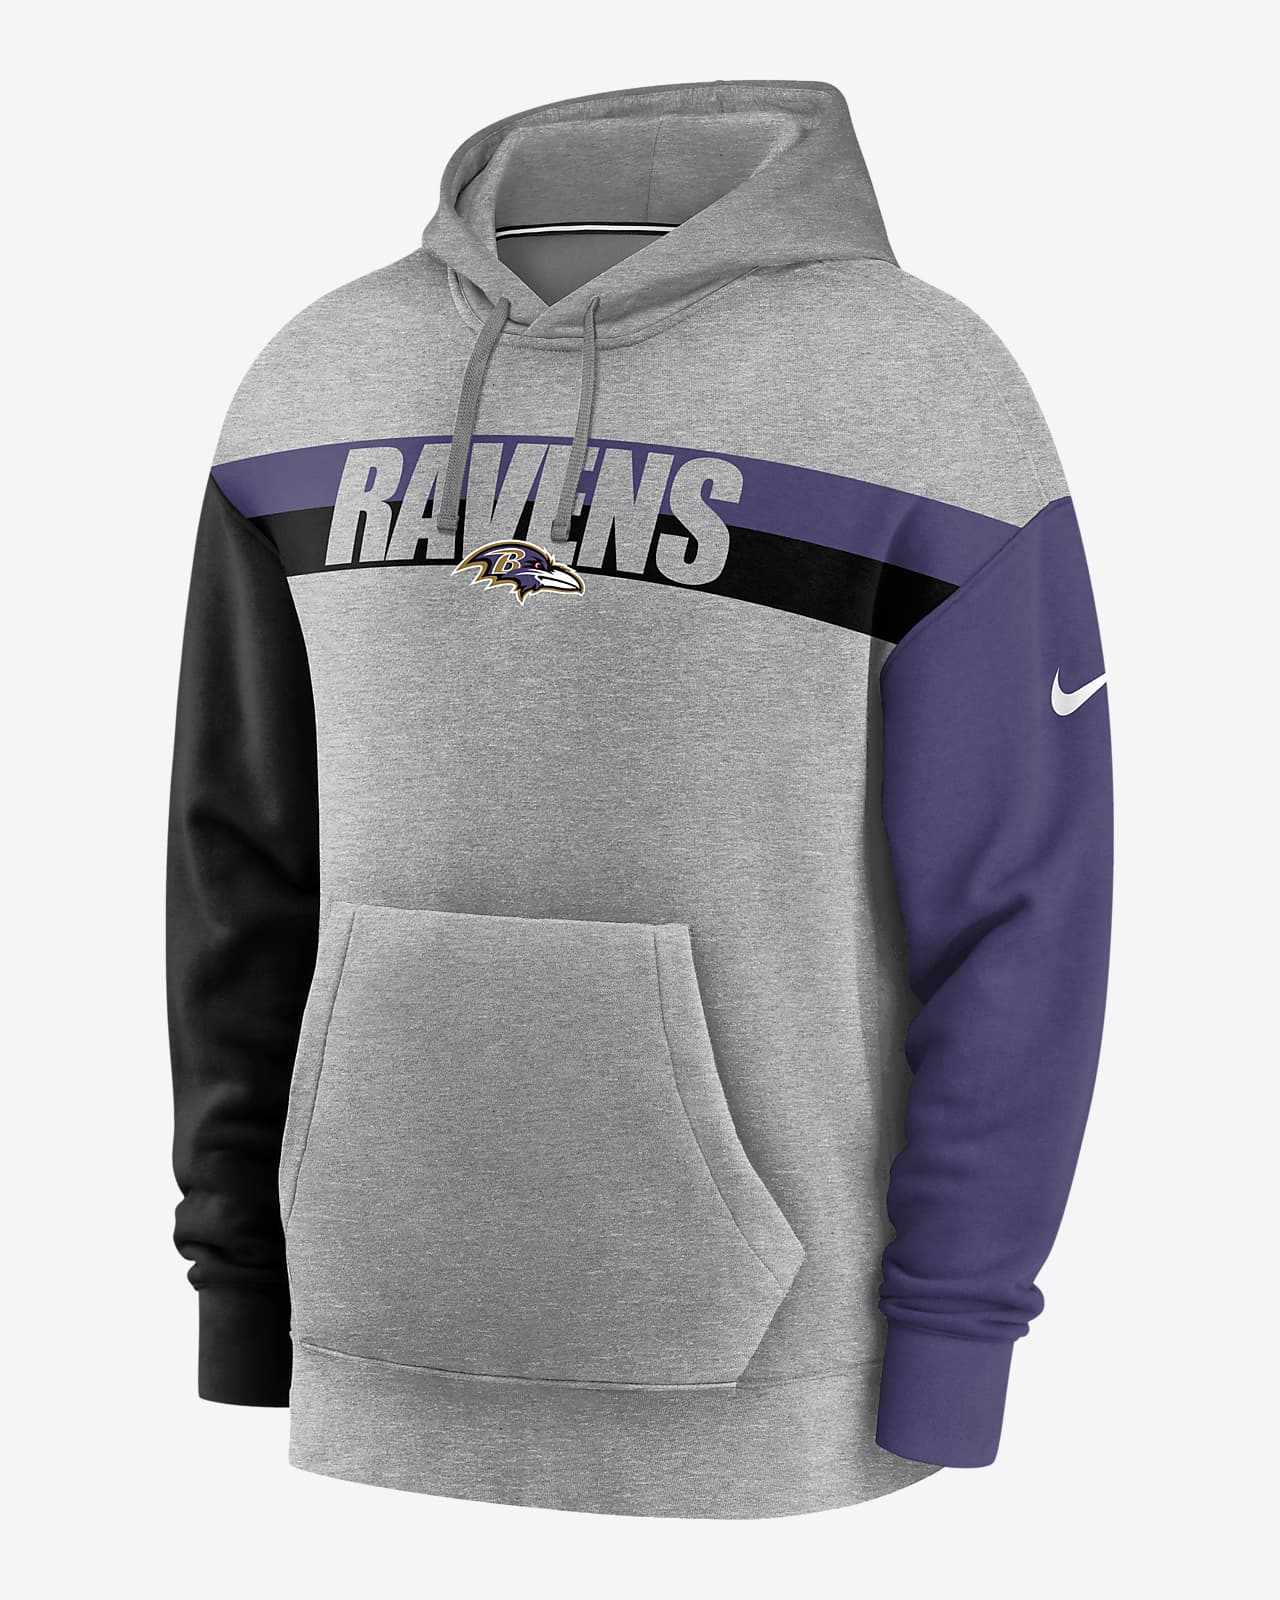 ravens army hoodie,www.autoconnective.in